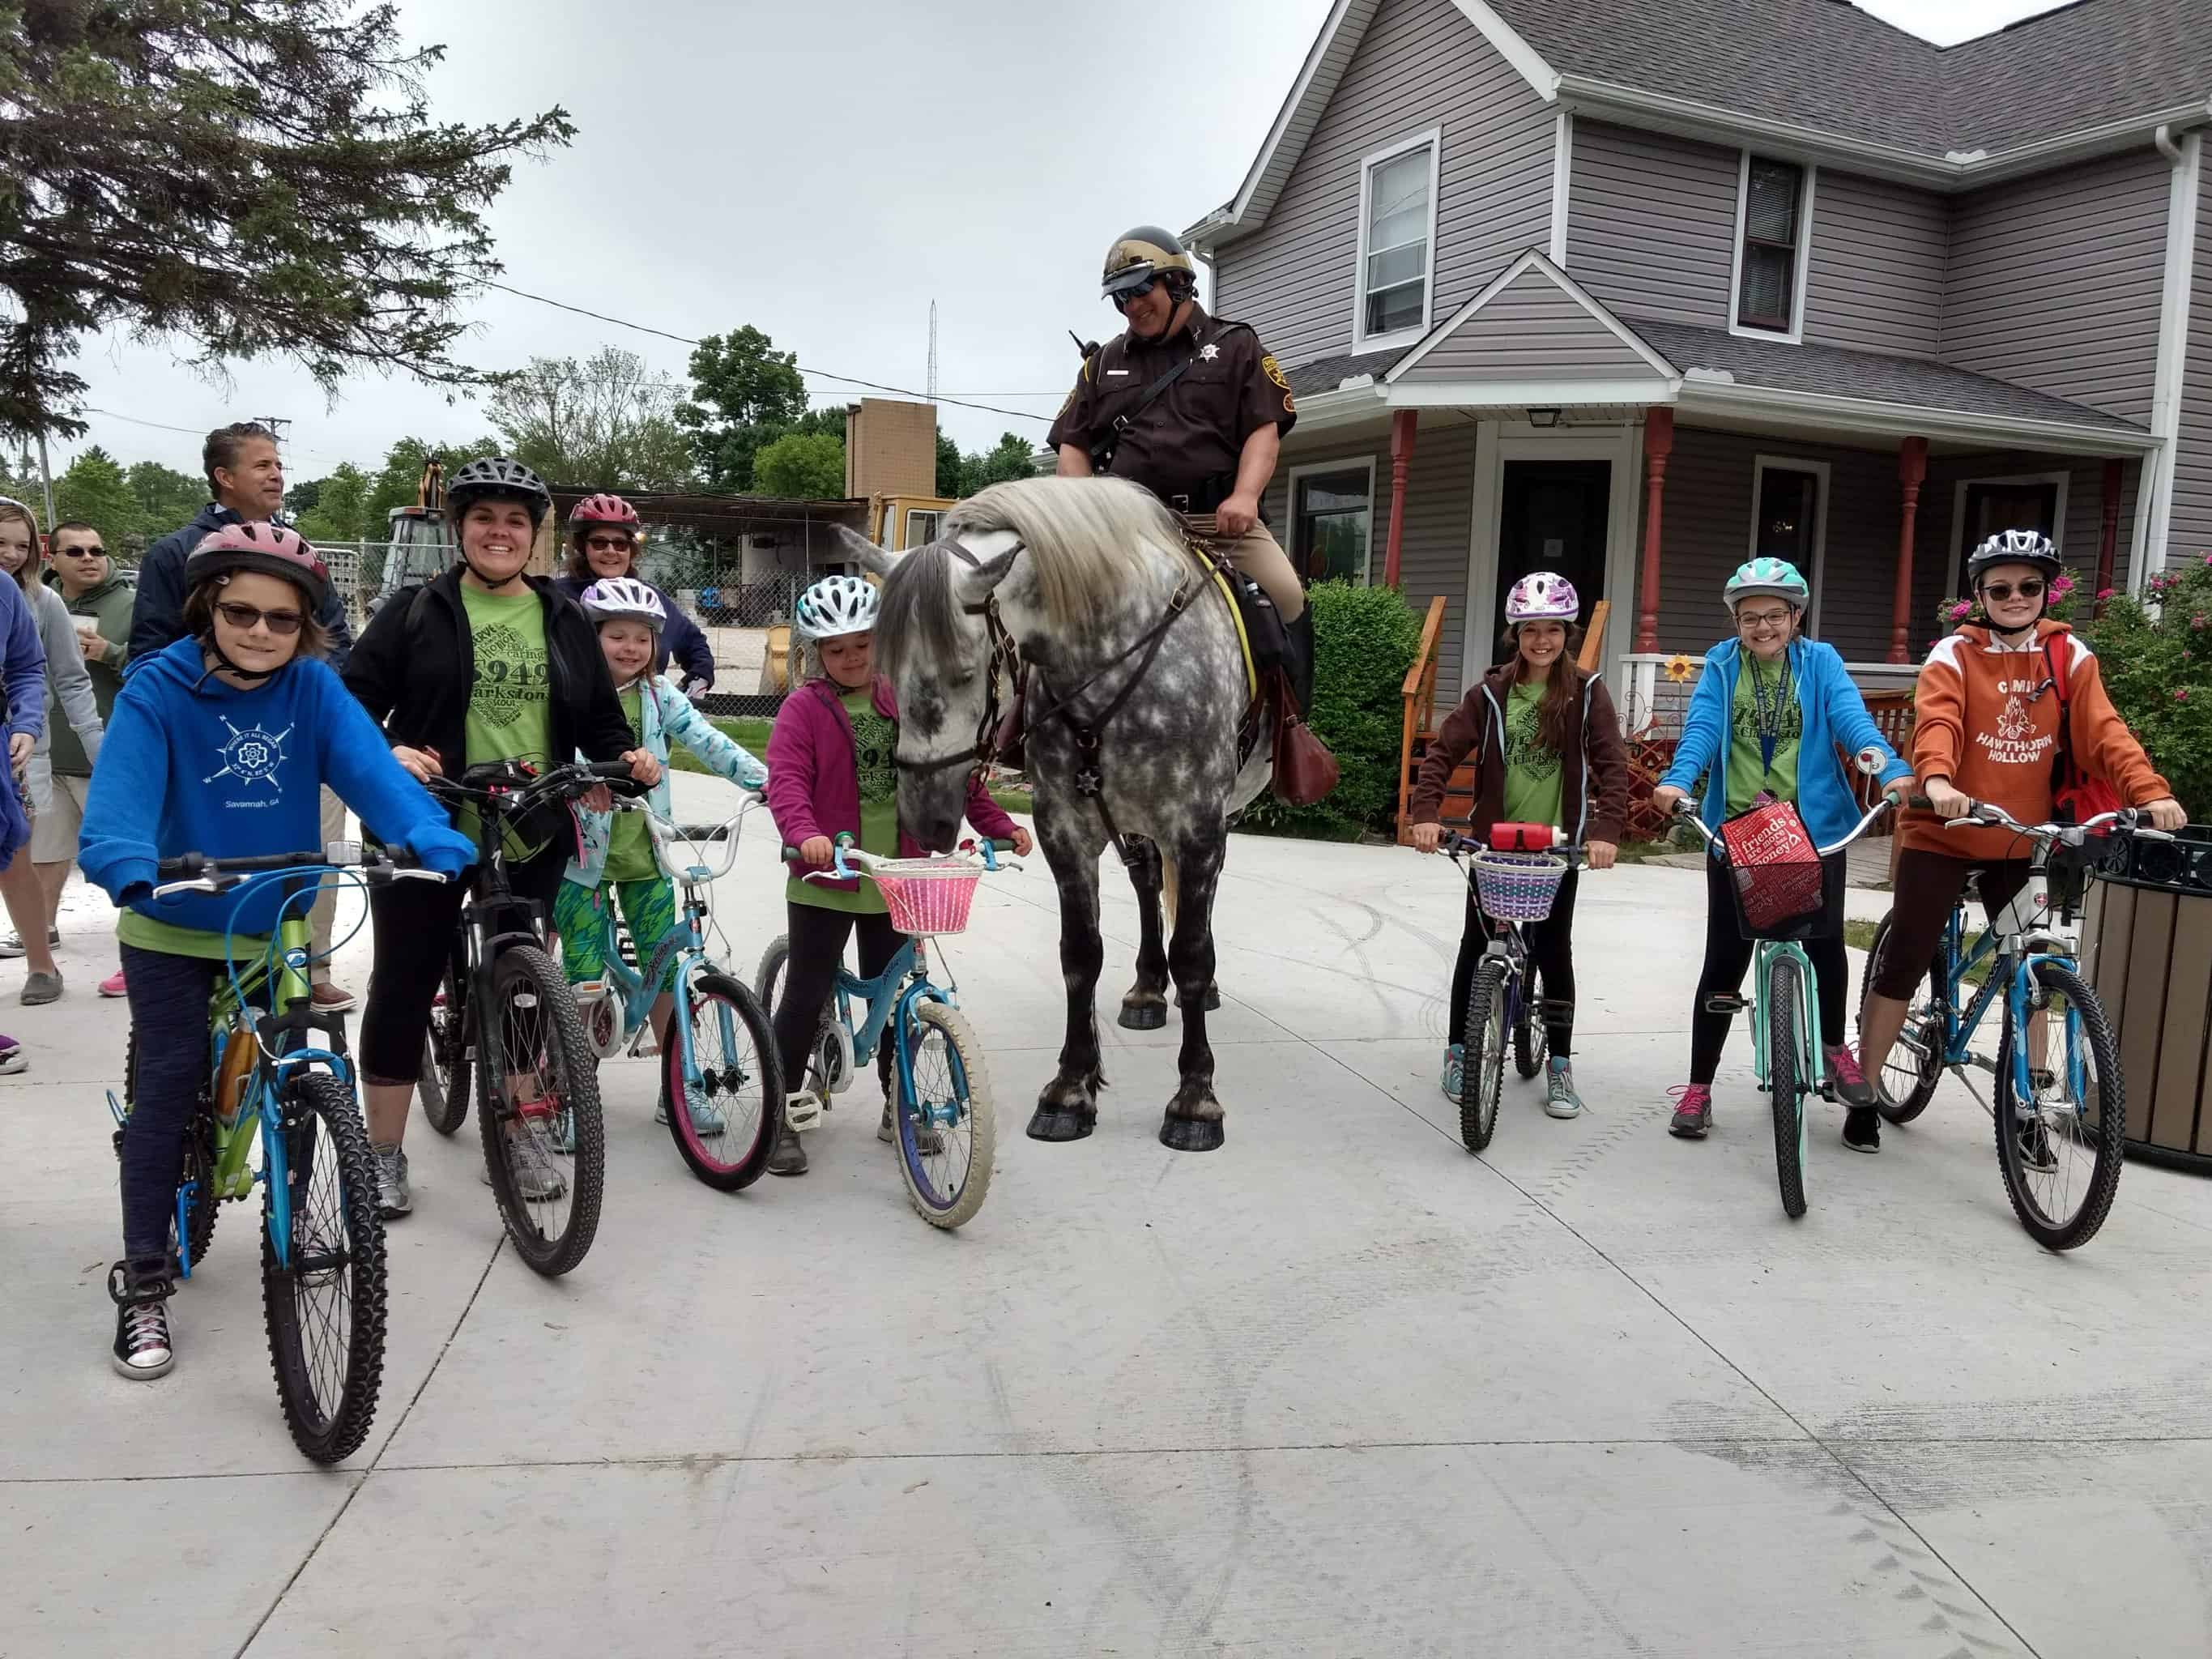 Cyclists get ready to enjoy the Paint Creek Trail by stopping to say hello to the mounted Oakland County Sheriff outside the Orion Art Center in Downtown Lake Orion